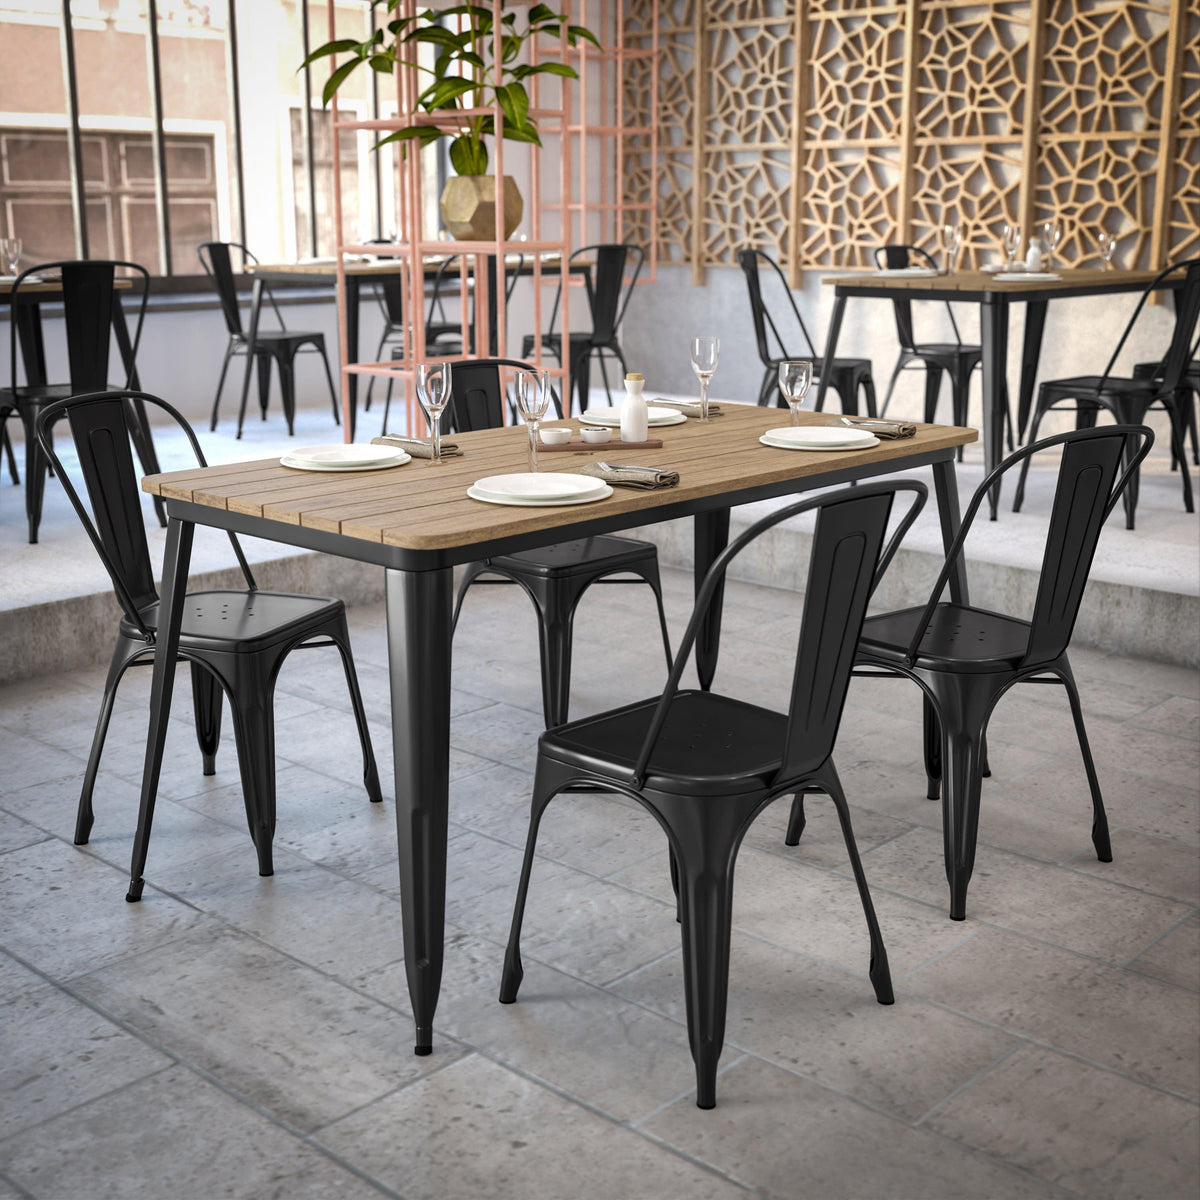 Brown/Black |#| 30x60 Commercial Poly Resin Restaurant Table with Umbrella Hole - Brown/Black